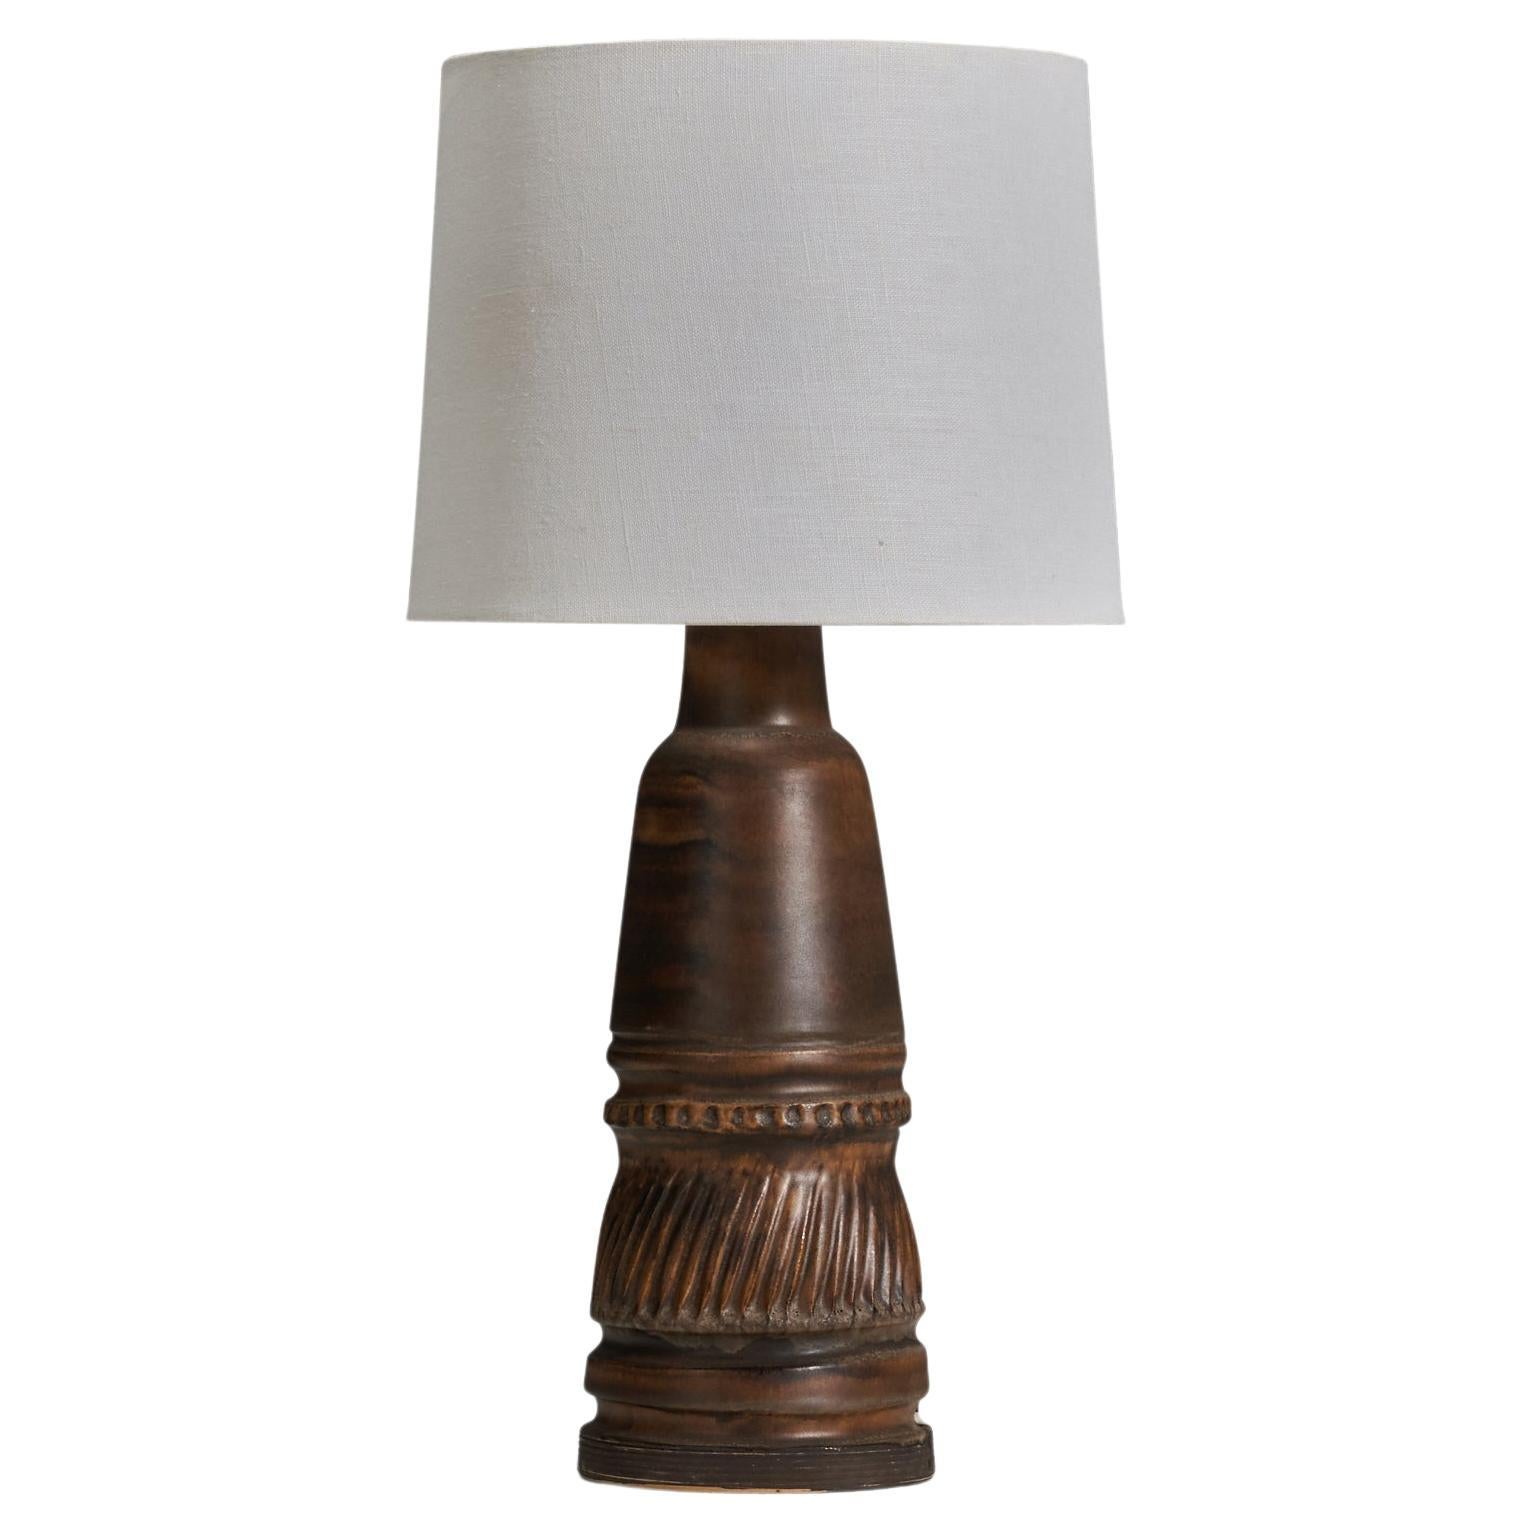 Irma Yourstone, Table Lamp, Brown Glazed Stoneware, Sweden, 1960s For Sale